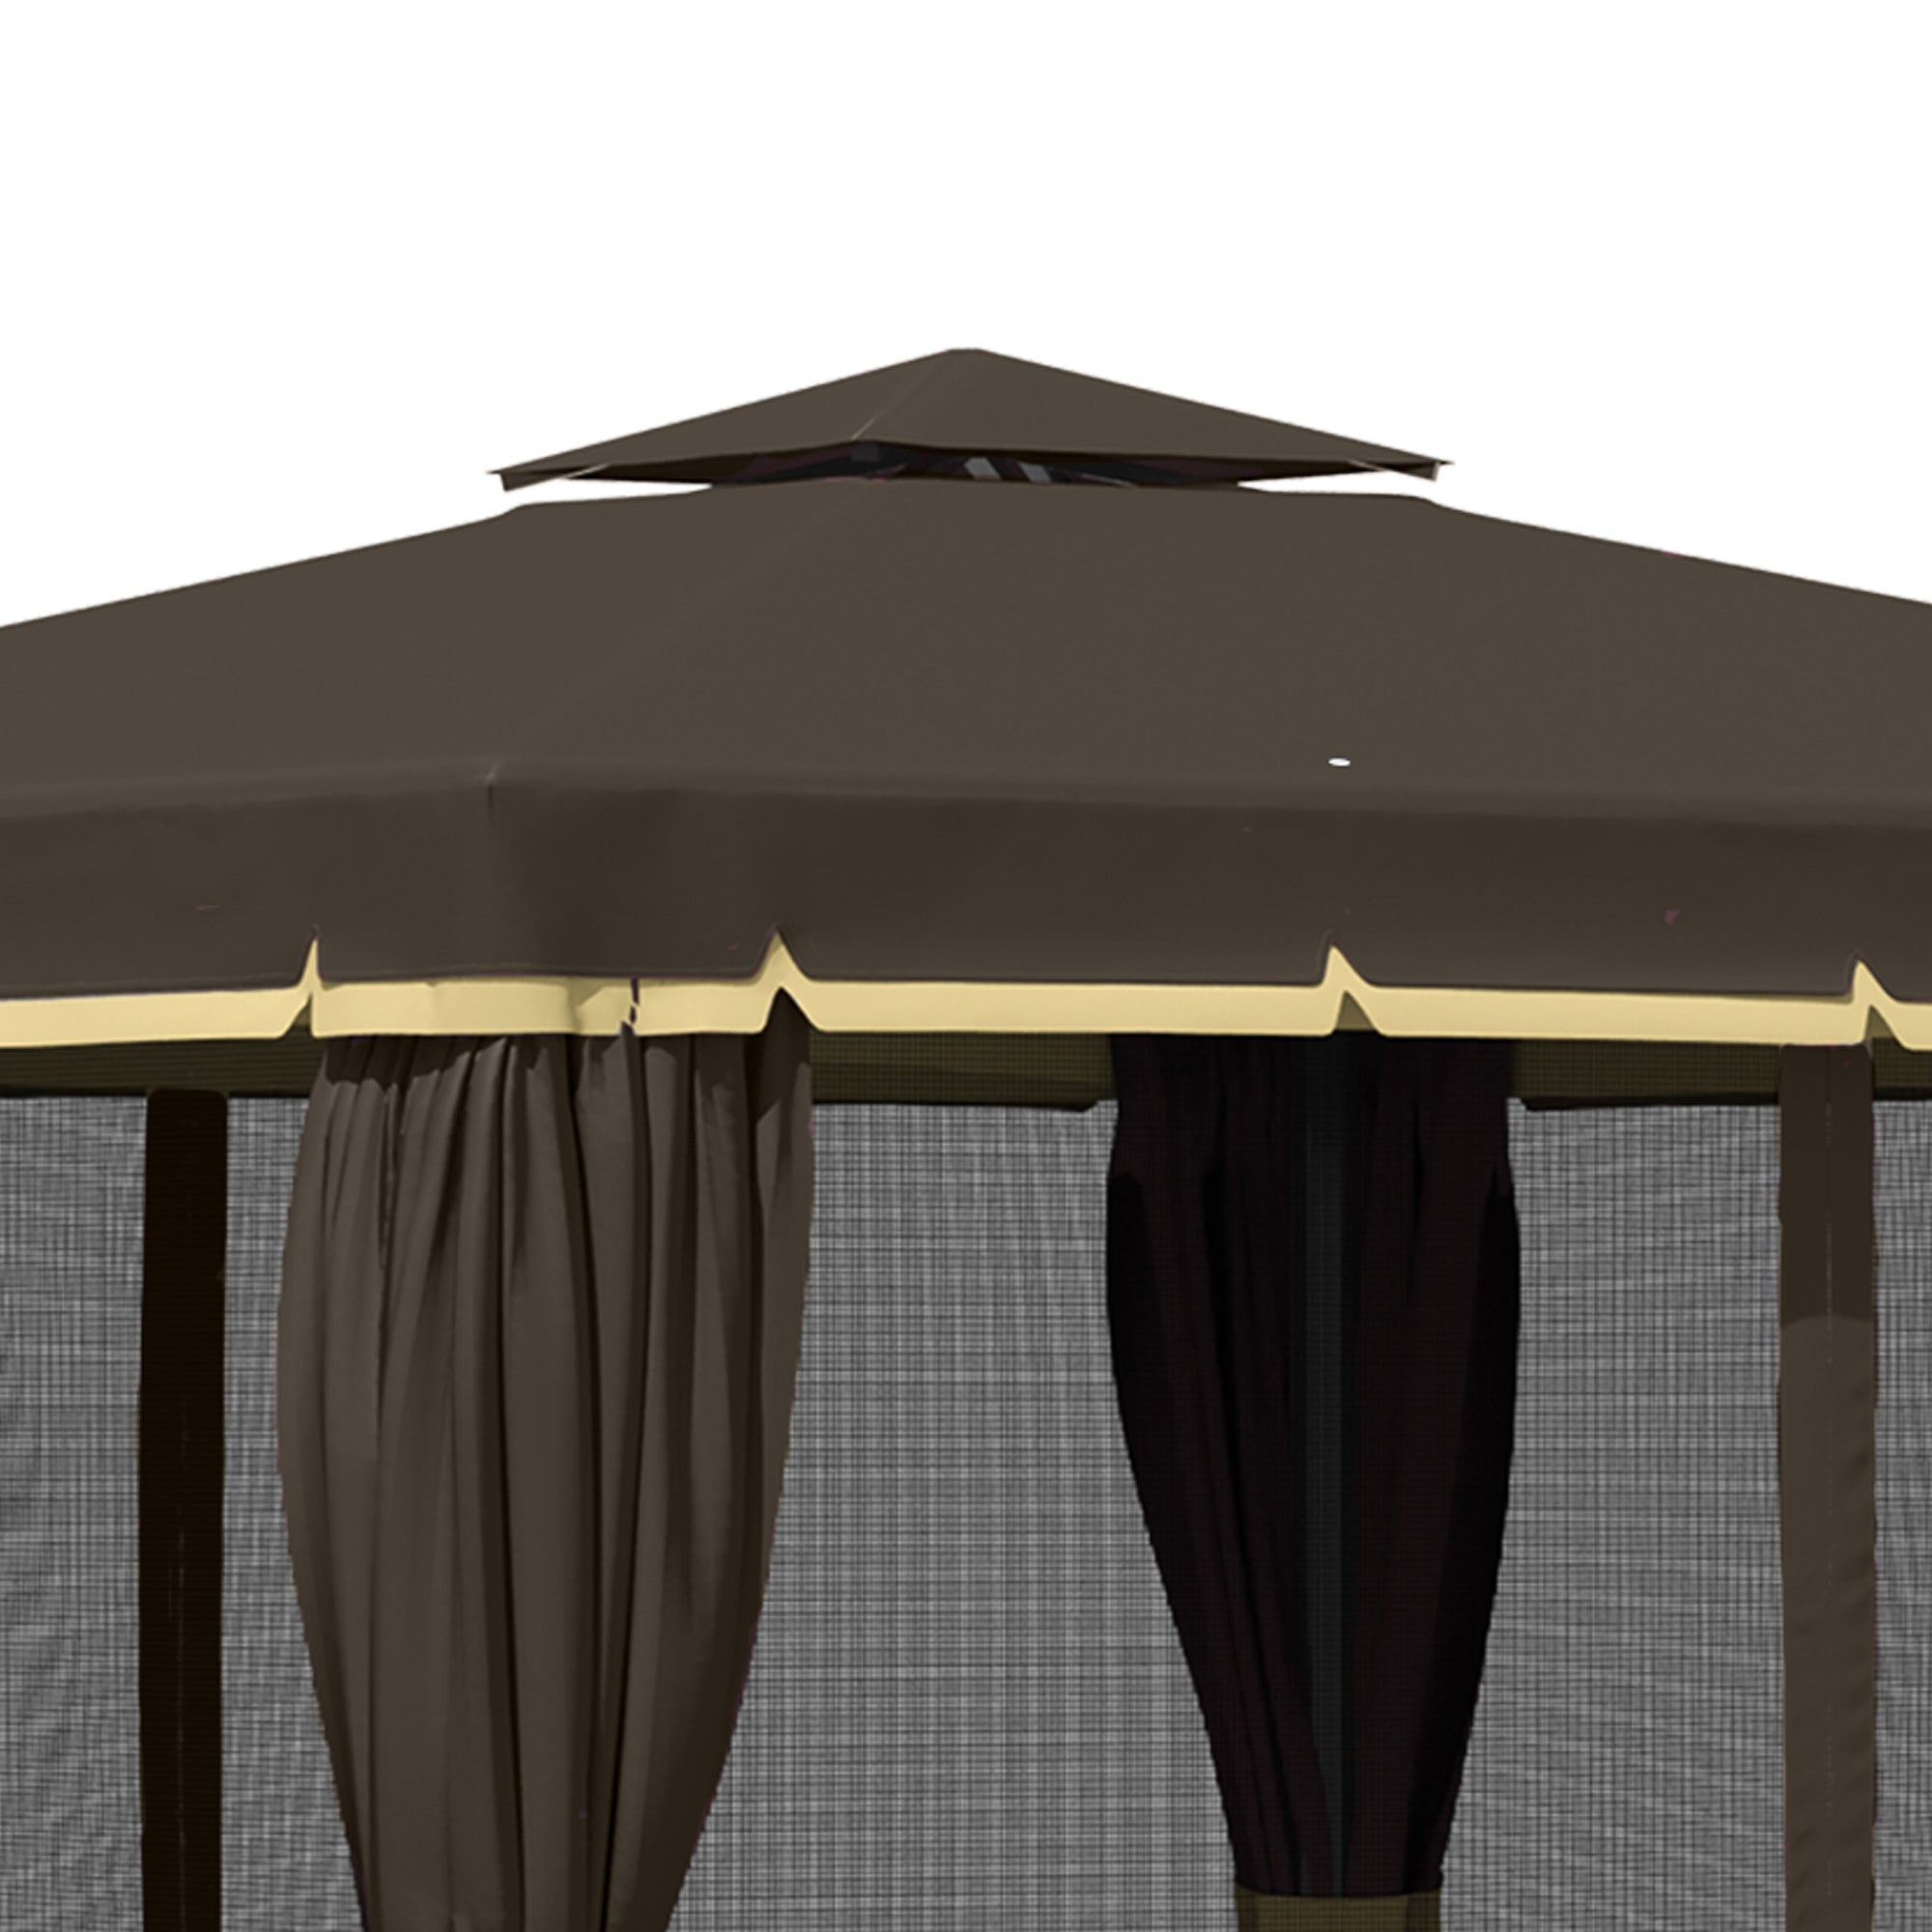 10'x10' Patio Gazebo, Aluminum Frame Double Roof Outdoor Gazebo Canopy Shelter with Netting & Curtains, for Garden, Lawn, Backyard and Deck - Coffee